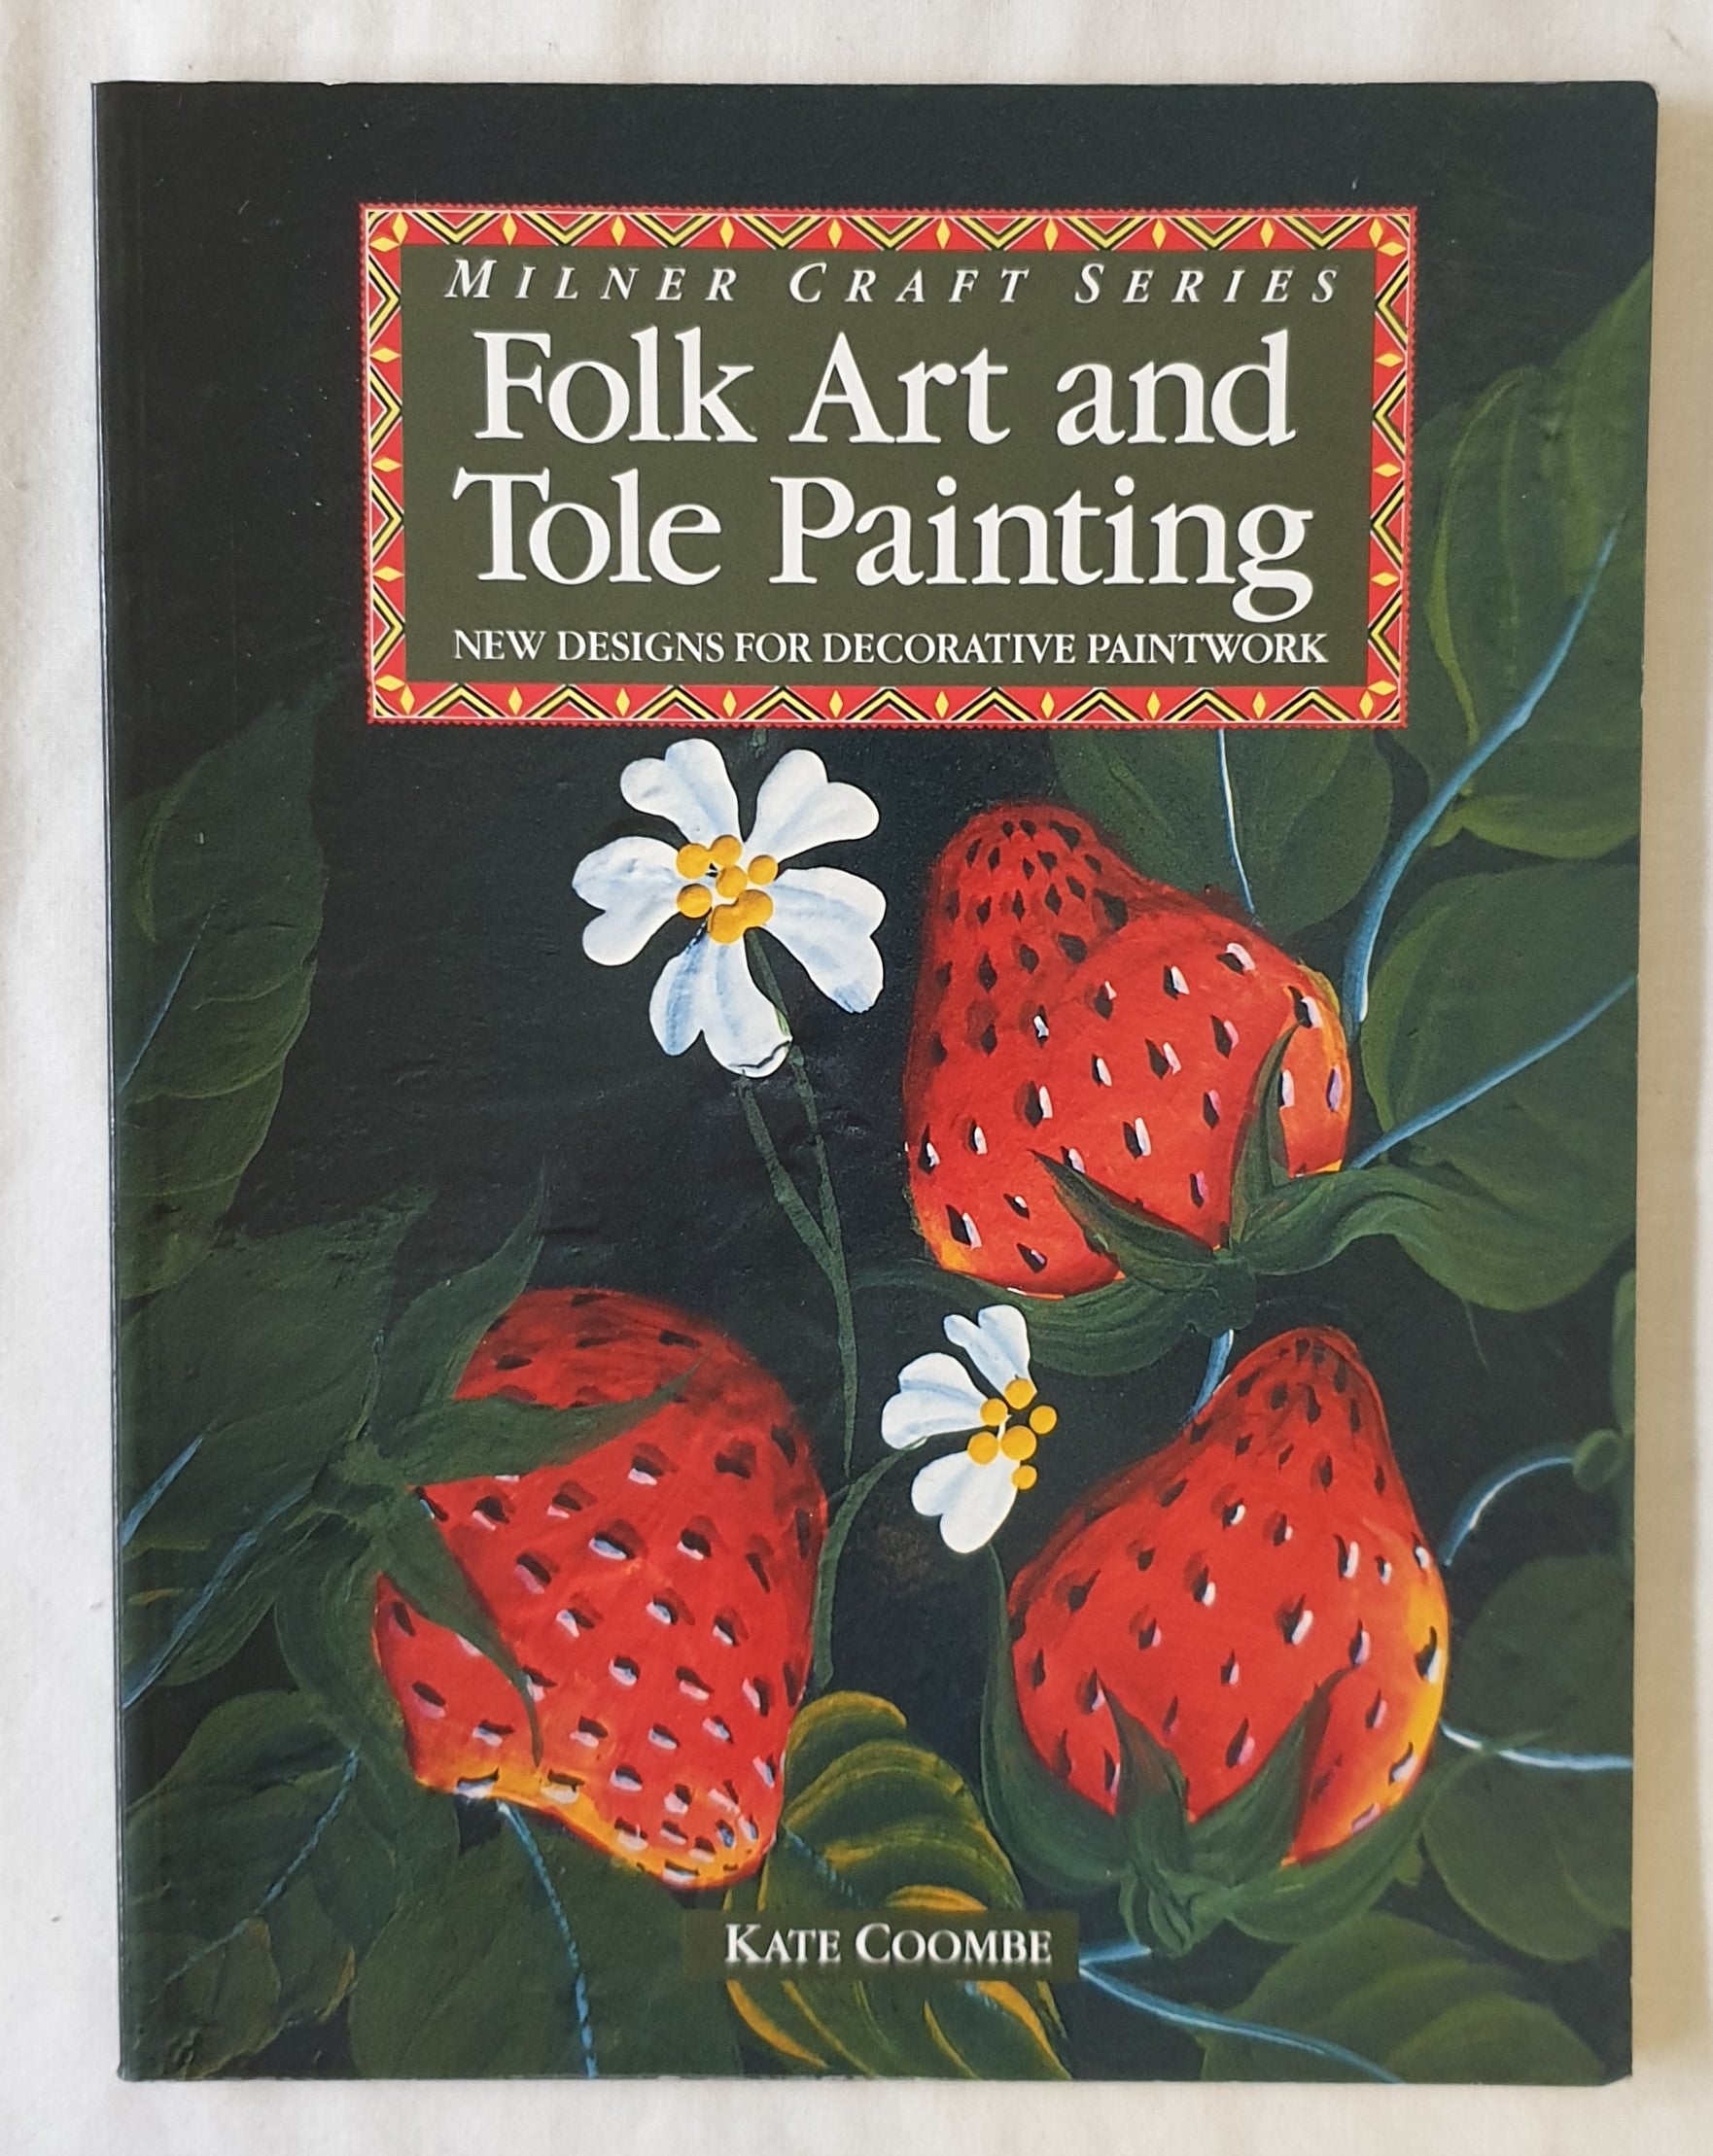 Folk Art and Tole Painting  New Designs for Decorative Paintwork  by Kate Coombe  (Milner Craft Series)